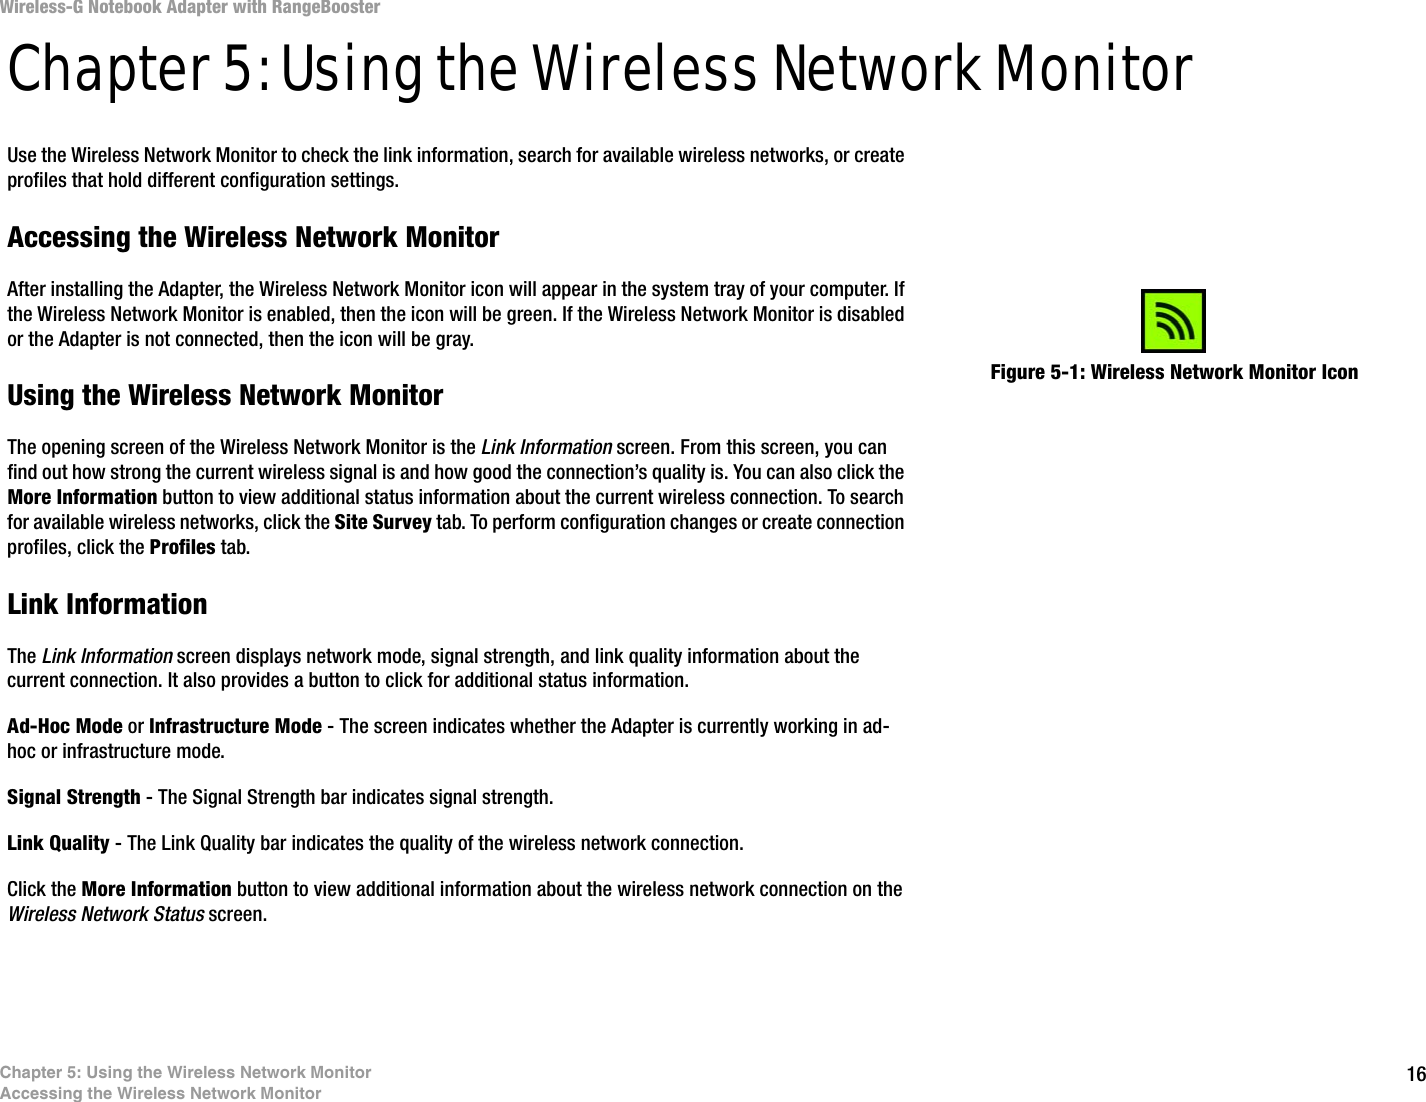 16Chapter 5: Using the Wireless Network MonitorAccessing the Wireless Network MonitorWireless-G Notebook Adapter with RangeBoosterChapter 5: Using the Wireless Network MonitorUse the Wireless Network Monitor to check the link information, search for available wireless networks, or create profiles that hold different configuration settings.Accessing the Wireless Network MonitorAfter installing the Adapter, the Wireless Network Monitor icon will appear in the system tray of your computer. If the Wireless Network Monitor is enabled, then the icon will be green. If the Wireless Network Monitor is disabled or the Adapter is not connected, then the icon will be gray.Using the Wireless Network MonitorThe opening screen of the Wireless Network Monitor is the Link Information screen. From this screen, you can find out how strong the current wireless signal is and how good the connection’s quality is. You can also click the More Information button to view additional status information about the current wireless connection. To search for available wireless networks, click the Site Survey tab. To perform configuration changes or create connection profiles, click the Profiles tab.Link InformationThe Link Information screen displays network mode, signal strength, and link quality information about the current connection. It also provides a button to click for additional status information.Ad-Hoc Mode or Infrastructure Mode - The screen indicates whether the Adapter is currently working in ad-hoc or infrastructure mode.Signal Strength - The Signal Strength bar indicates signal strength. Link Quality - The Link Quality bar indicates the quality of the wireless network connection.Click the More Information button to view additional information about the wireless network connection on the Wireless Network Status screen.Figure 5-1: Wireless Network Monitor Icon